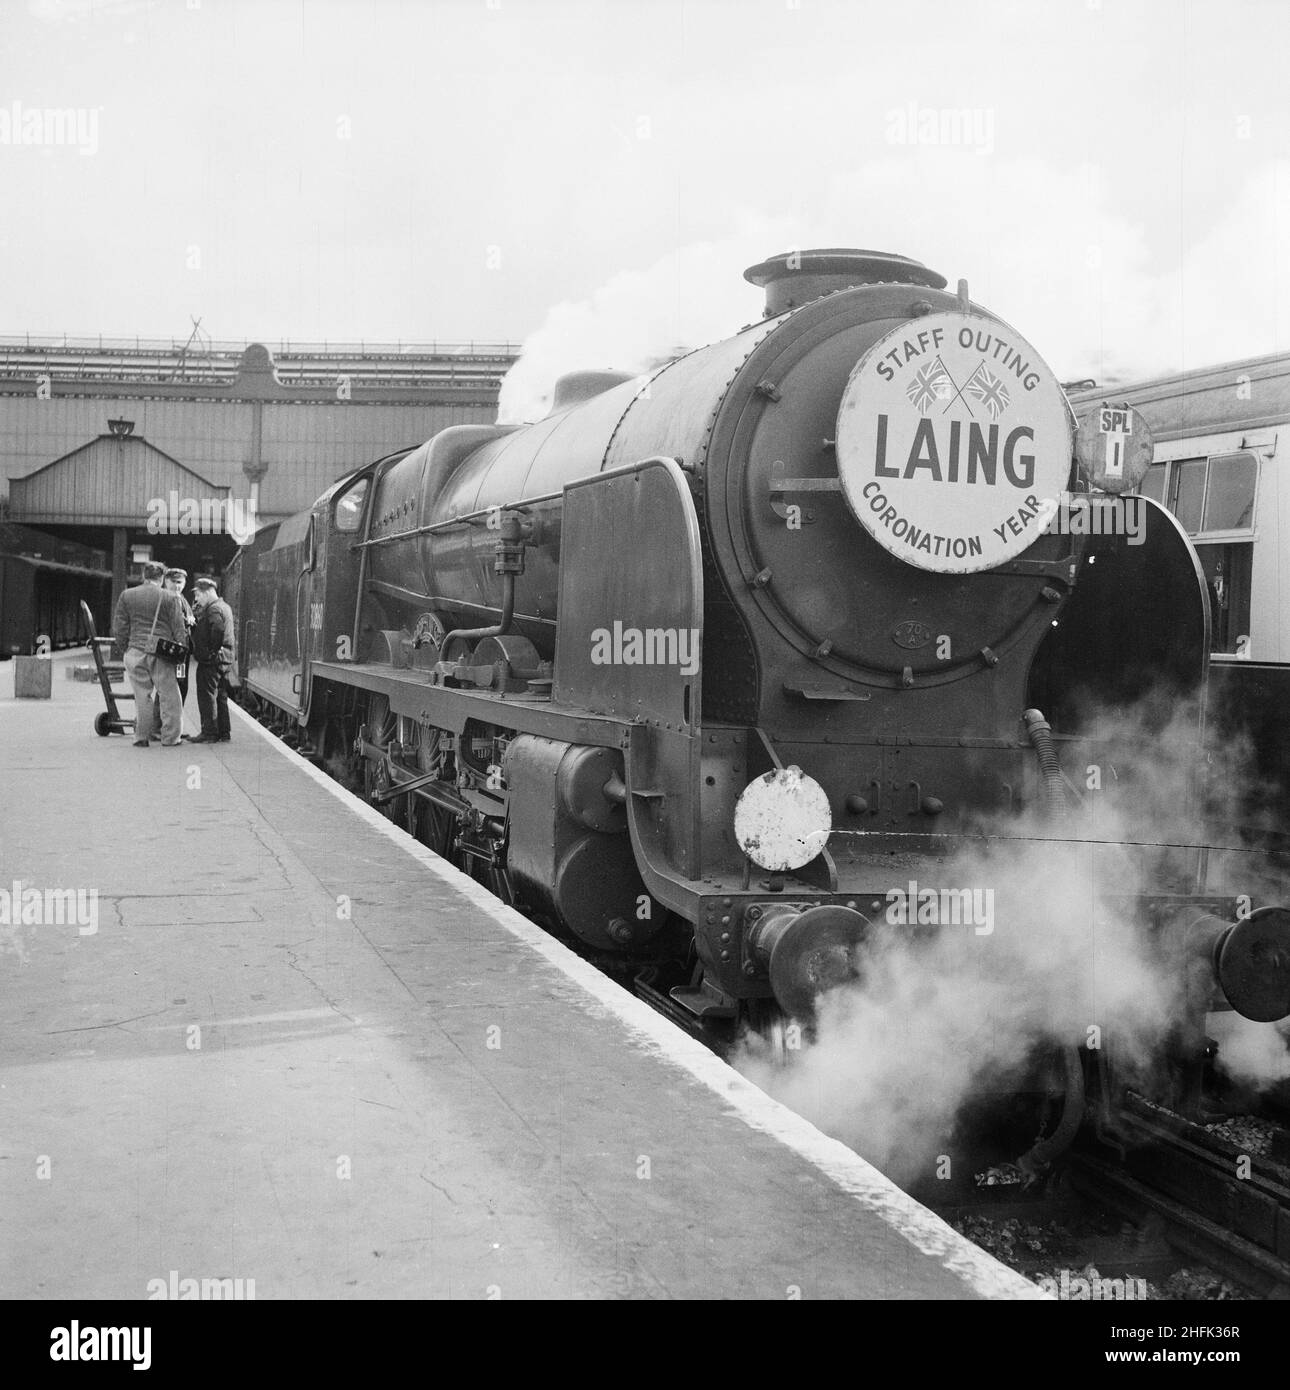 London Waterloo Station, York Road, Waterloo, Lambeth, London, 30/05/1953. A steam train chartered by Laing leaving Waterloo station, transporting Laing's London office on a staff outing to Bournemouth. Stock Photo